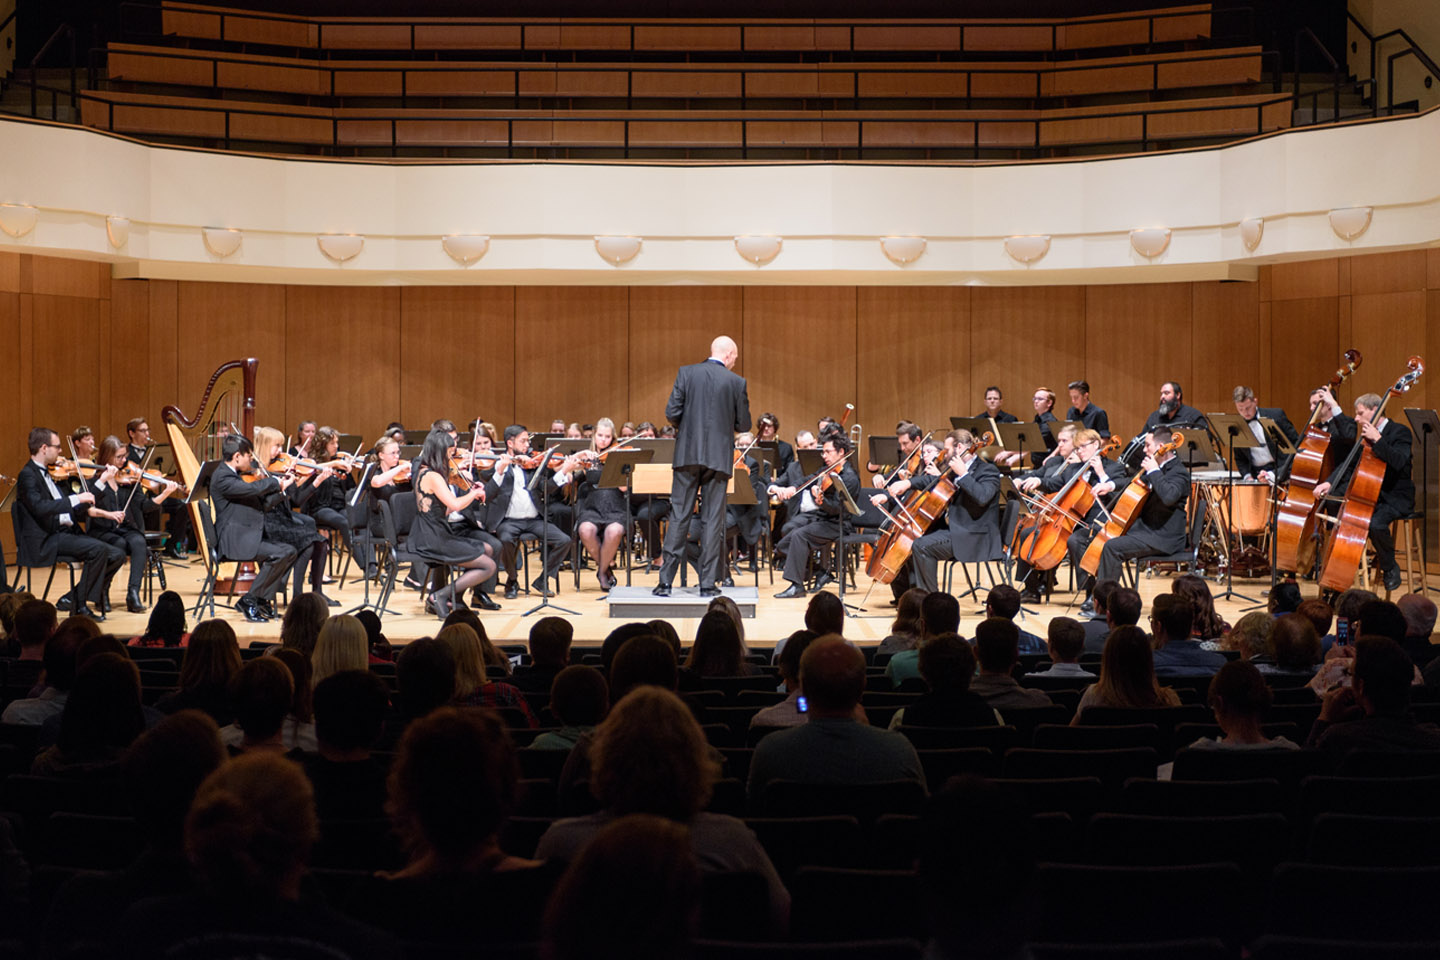 MSU Denver Symphony Orchestra performing a concert in the King Center Concert Hall